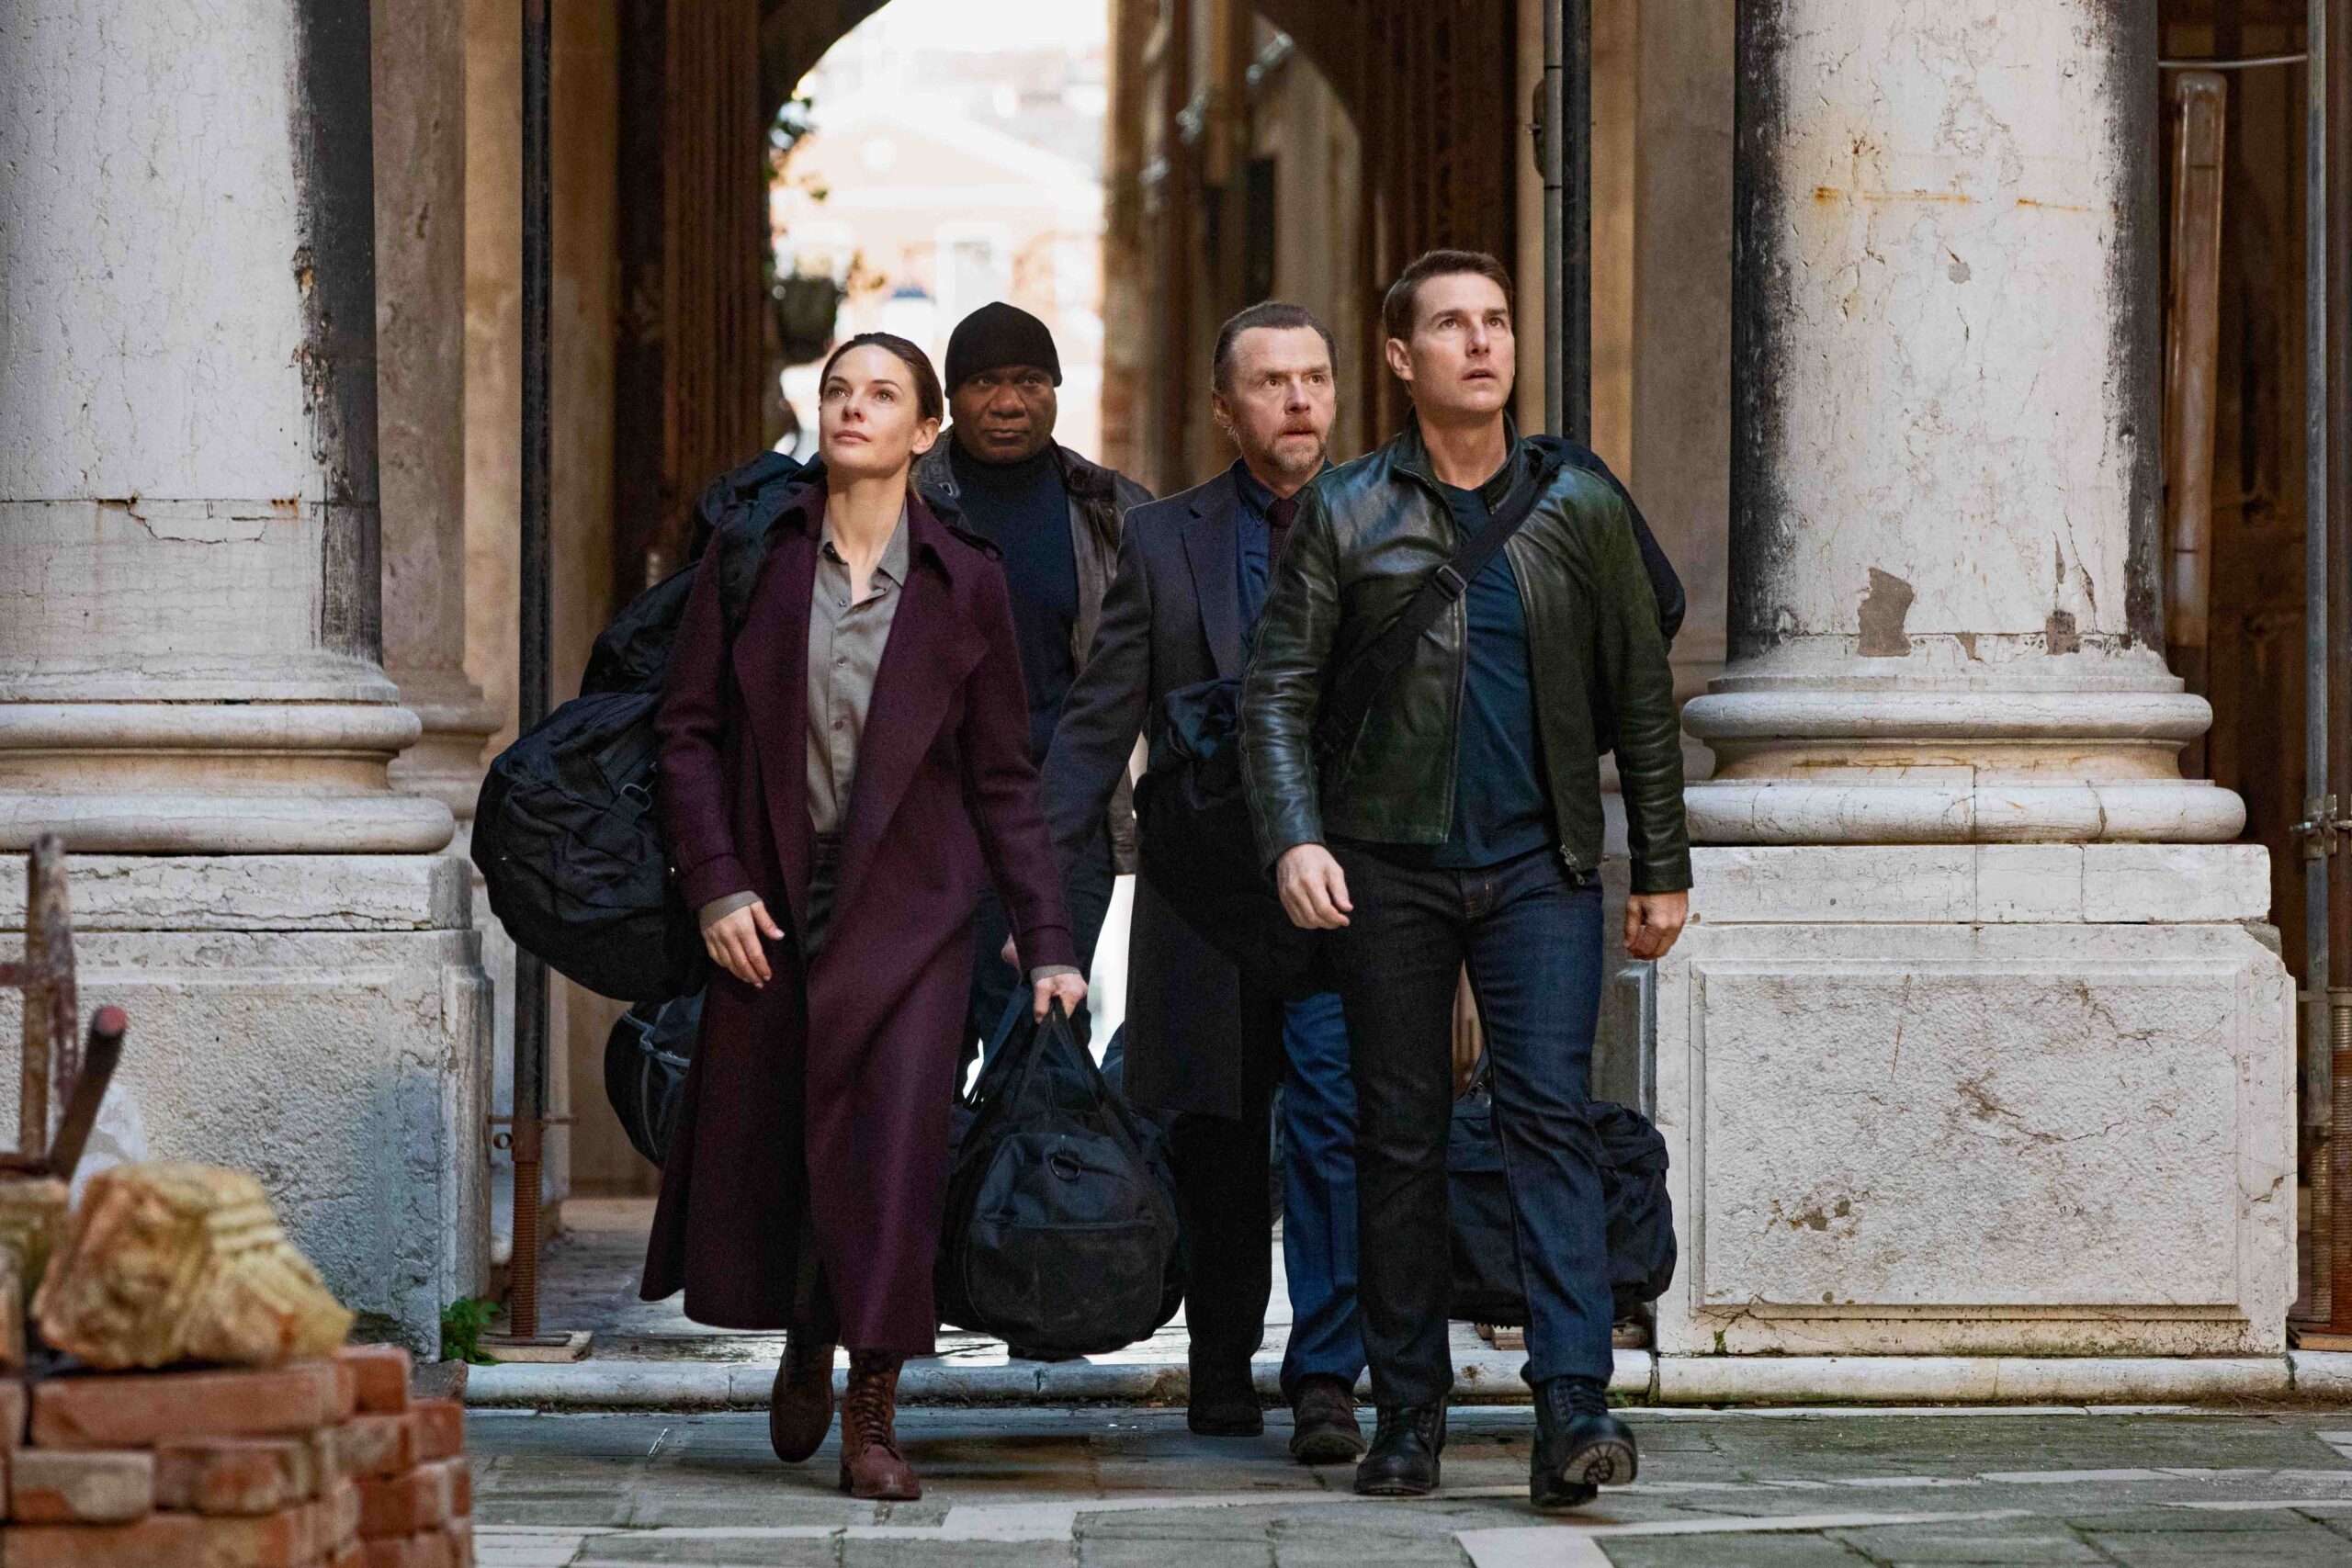 Rebecca Ferguson as Ilsa Faust, Ving Rhames as Luther Stickell, Simon Pegg as Benji Dunn, and Tom Cruise as Ethan Hunt in Mission: Impossible – Dead Reckoning Part One